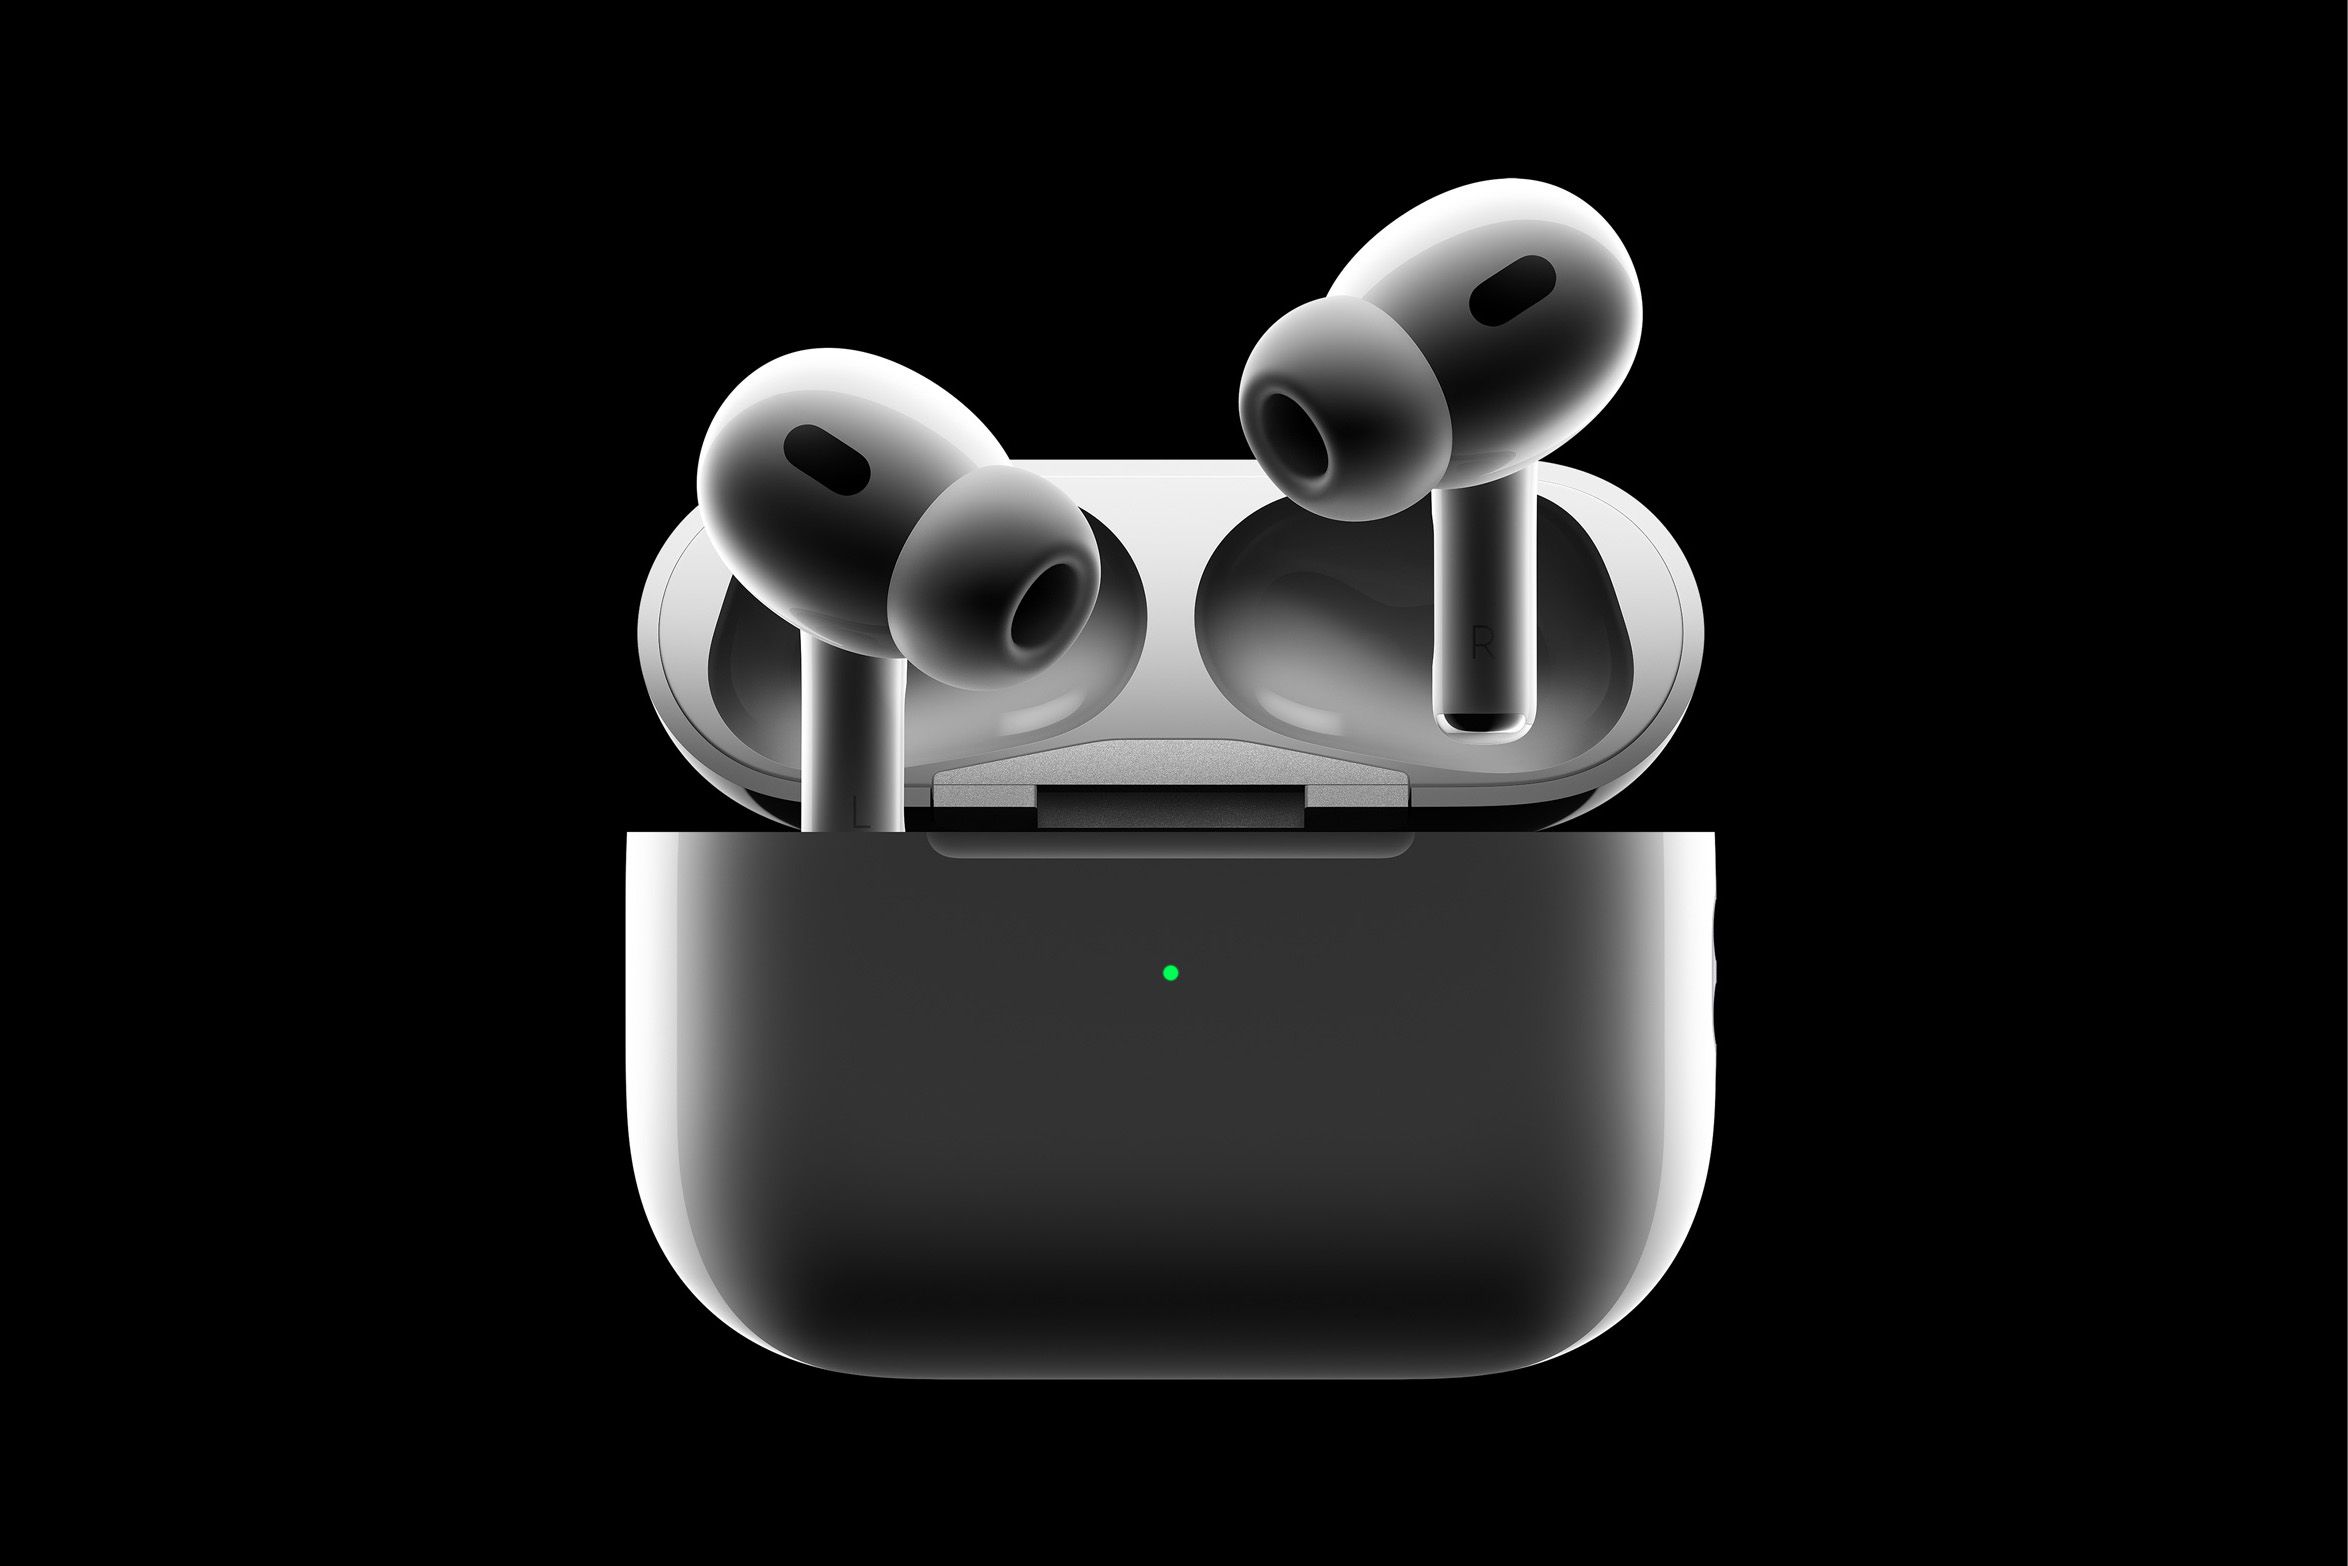 Shop Airpods Pro Nike Case with great discounts and prices online